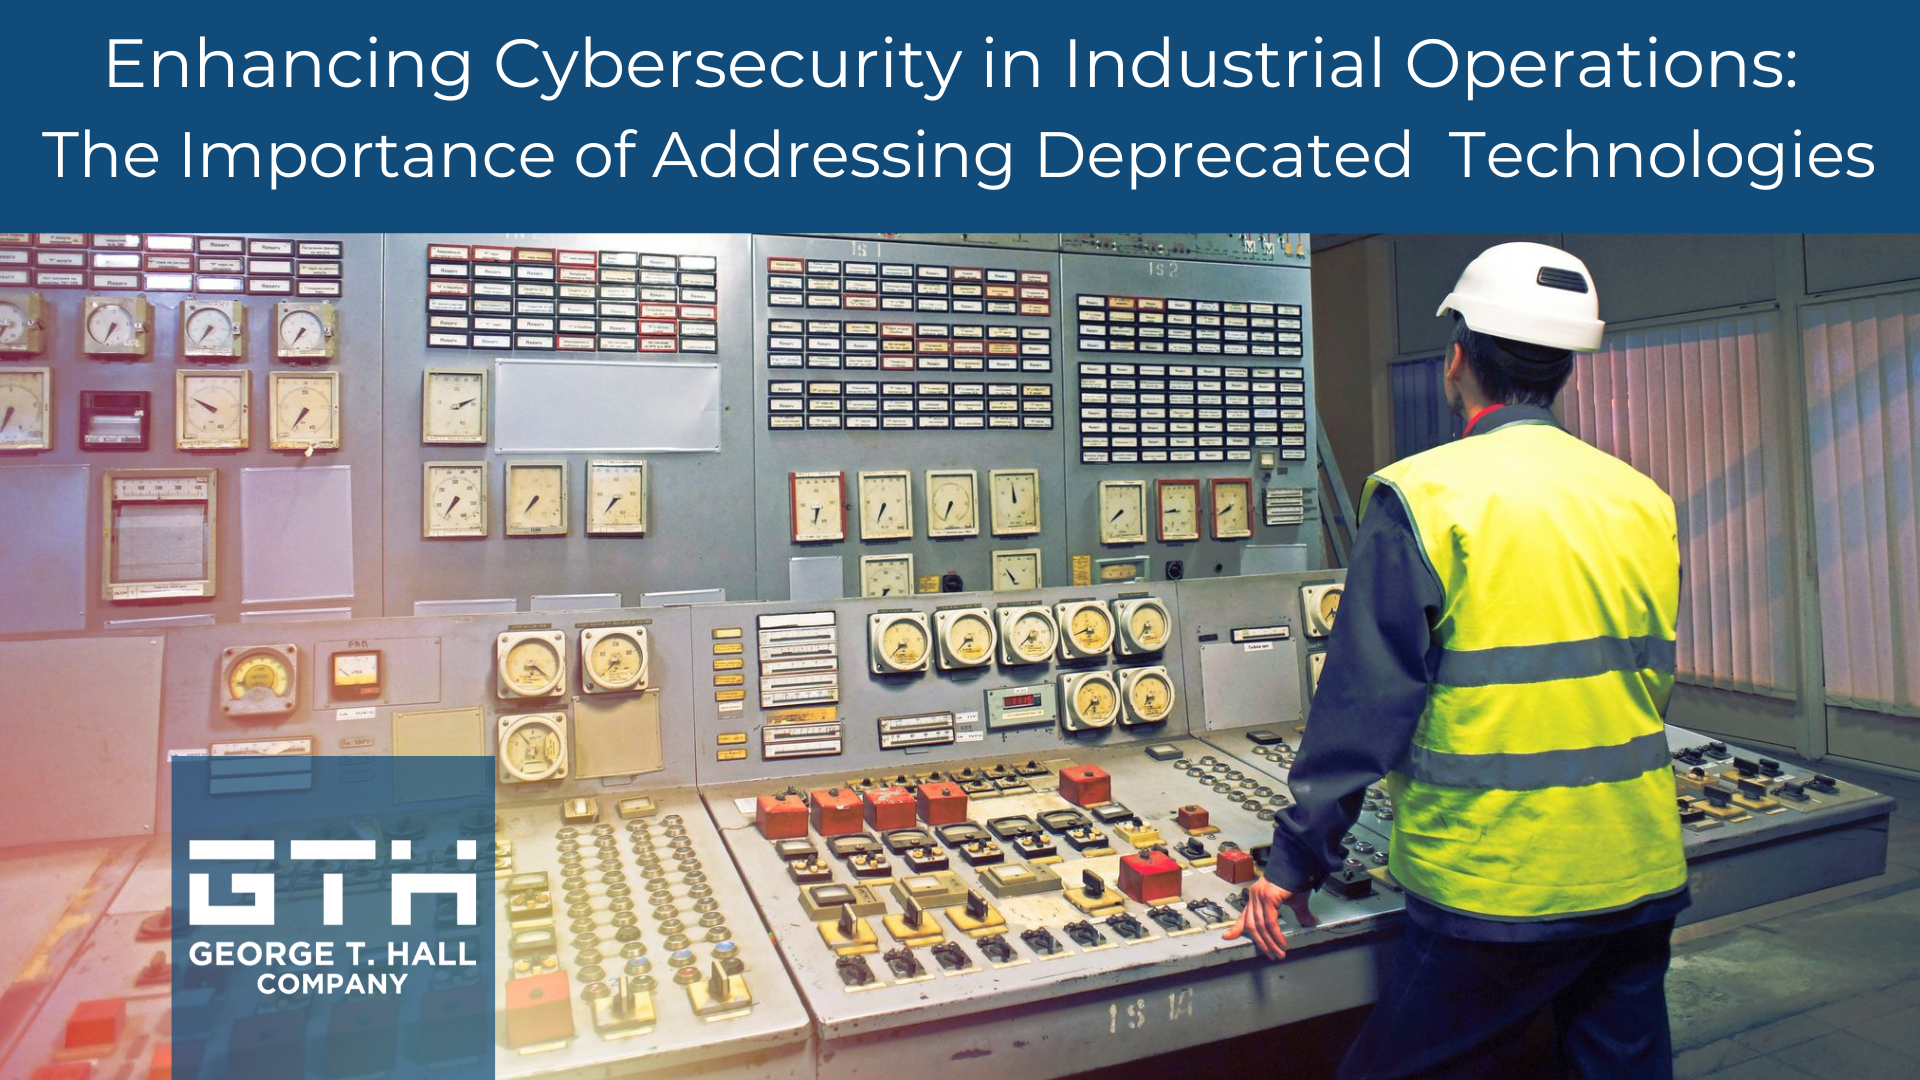 Enhancing Cybersecurity in Industrial Operations: The Importance of Addressing Deprecated Technologies